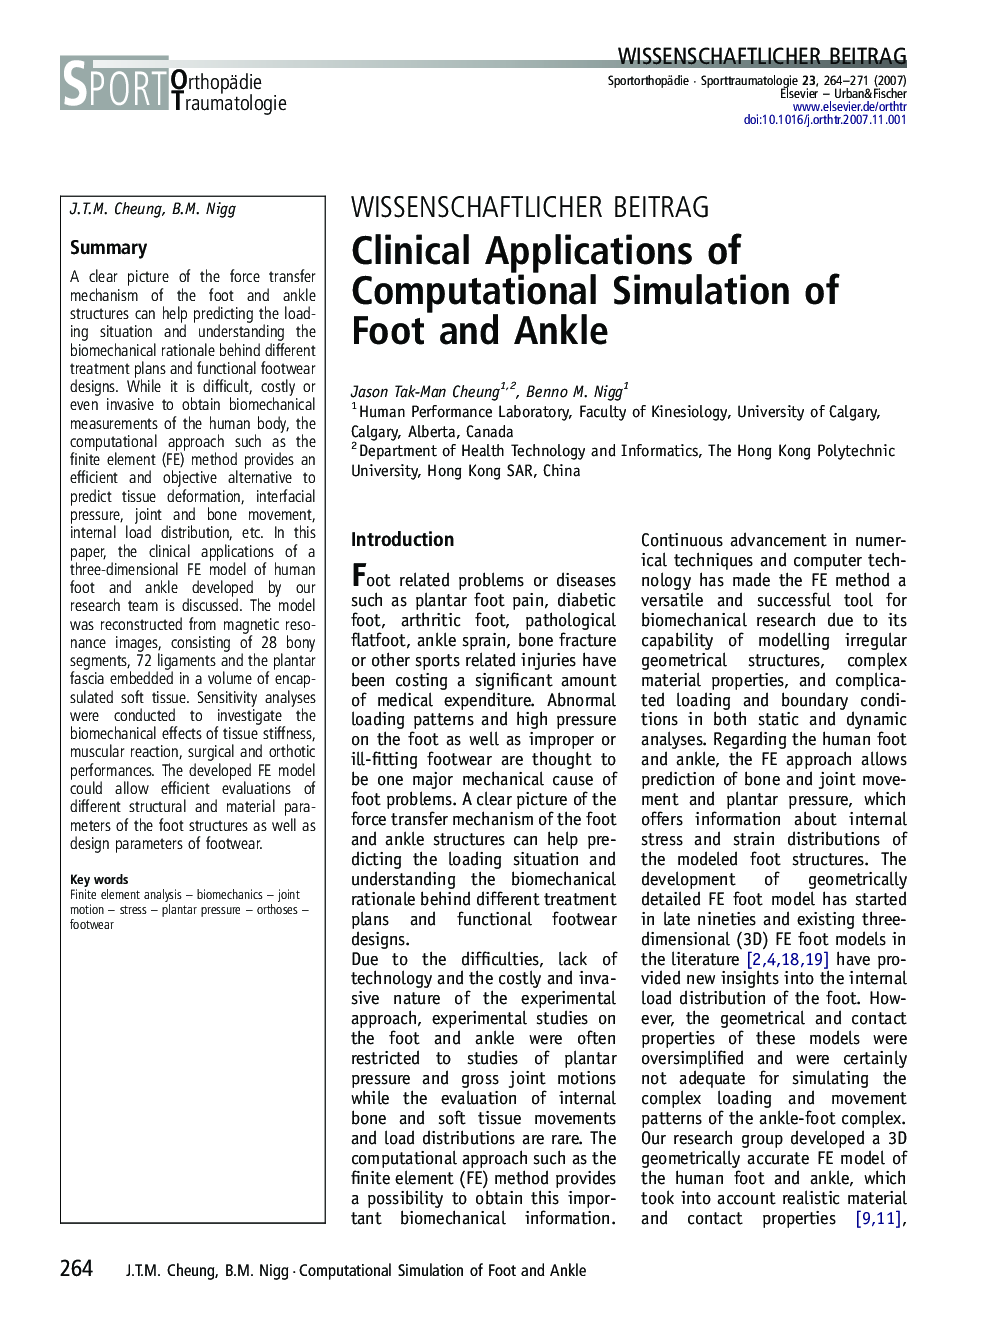 Clinical Applications of Computational Simulation of Foot and Ankle